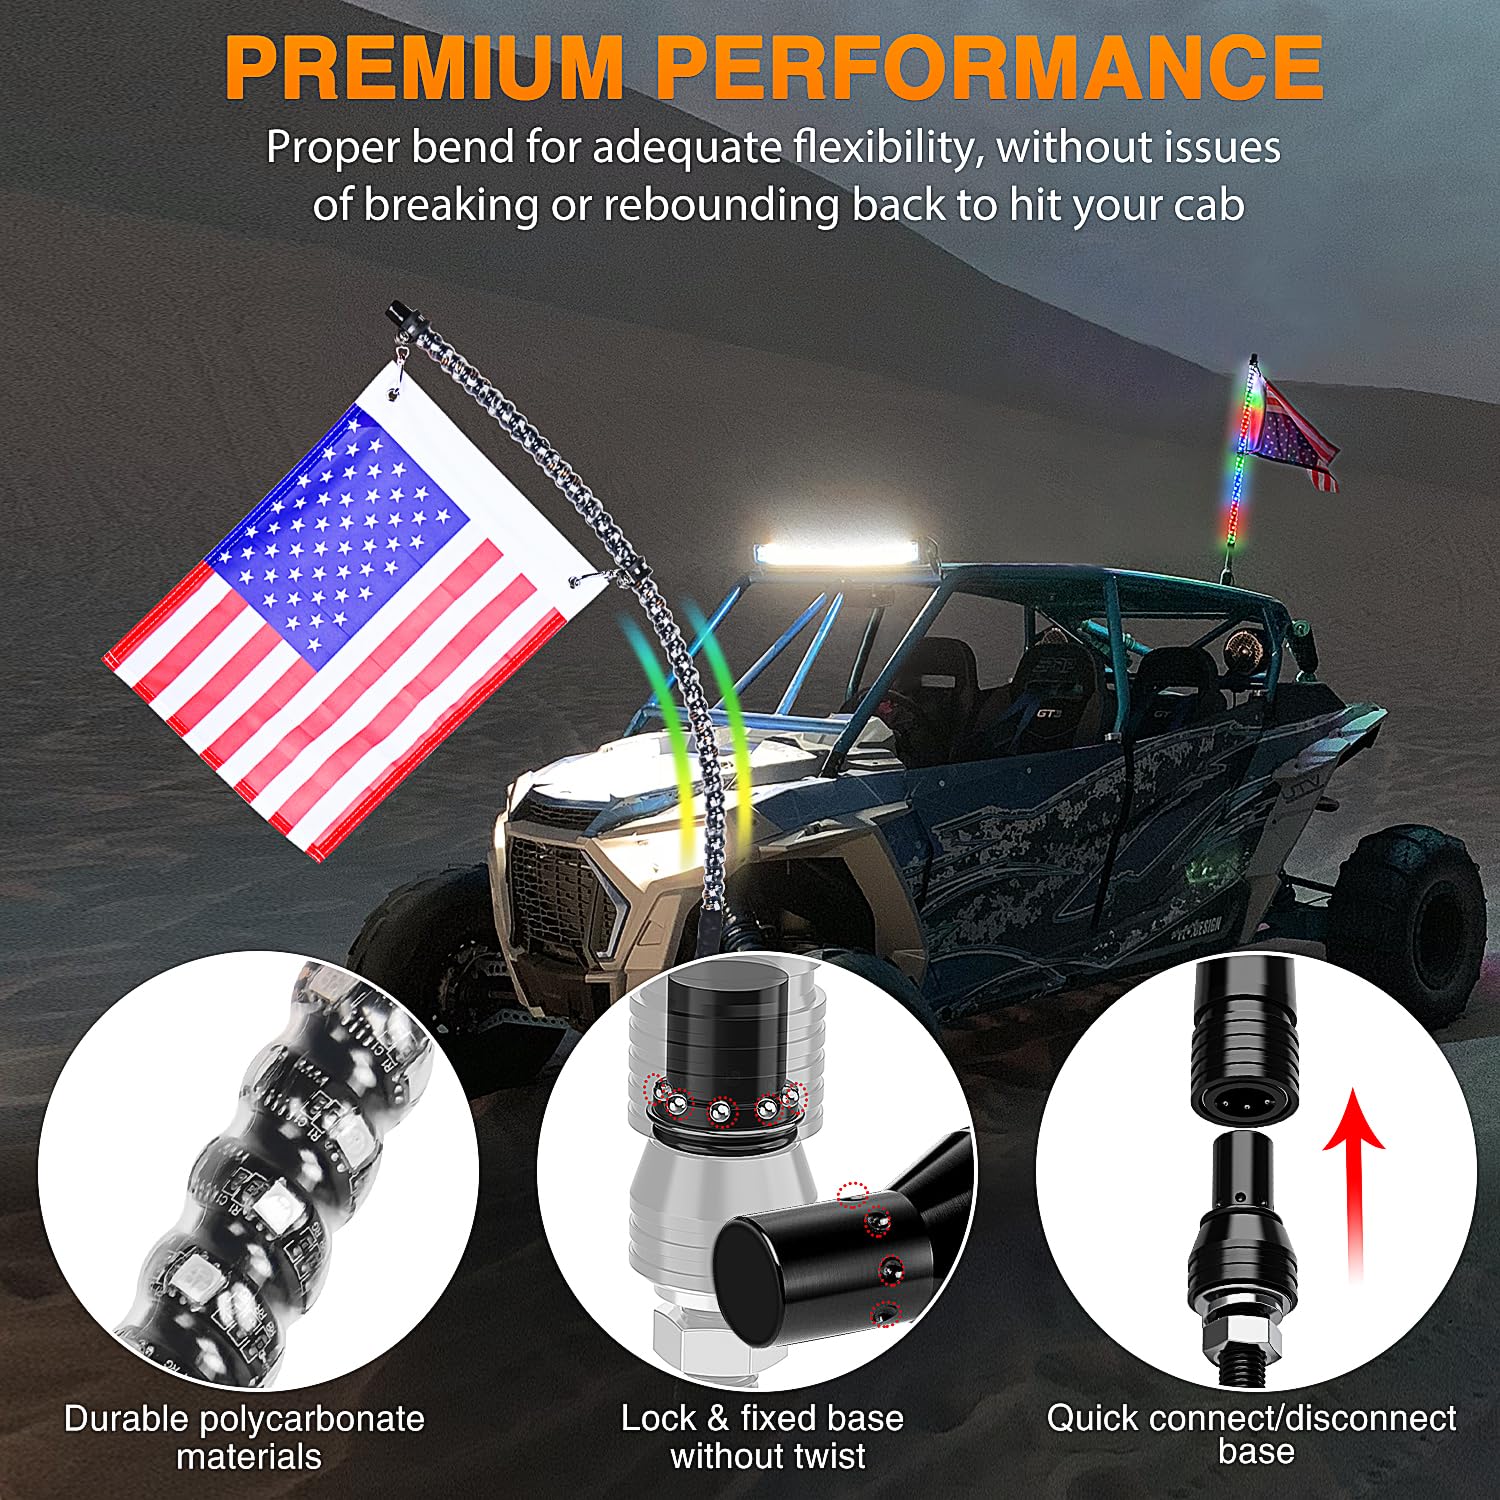 Nilight 1PC 2FT Spiral RGB Led Whip Light w/RGB Chasing/Dancing Light RF Remote Control Lighted Antenna Whips for Can-am ATV UTV RZR Polaris Dune Buggy 4-Wheeler Offroad Truck, 2 Year Warranty